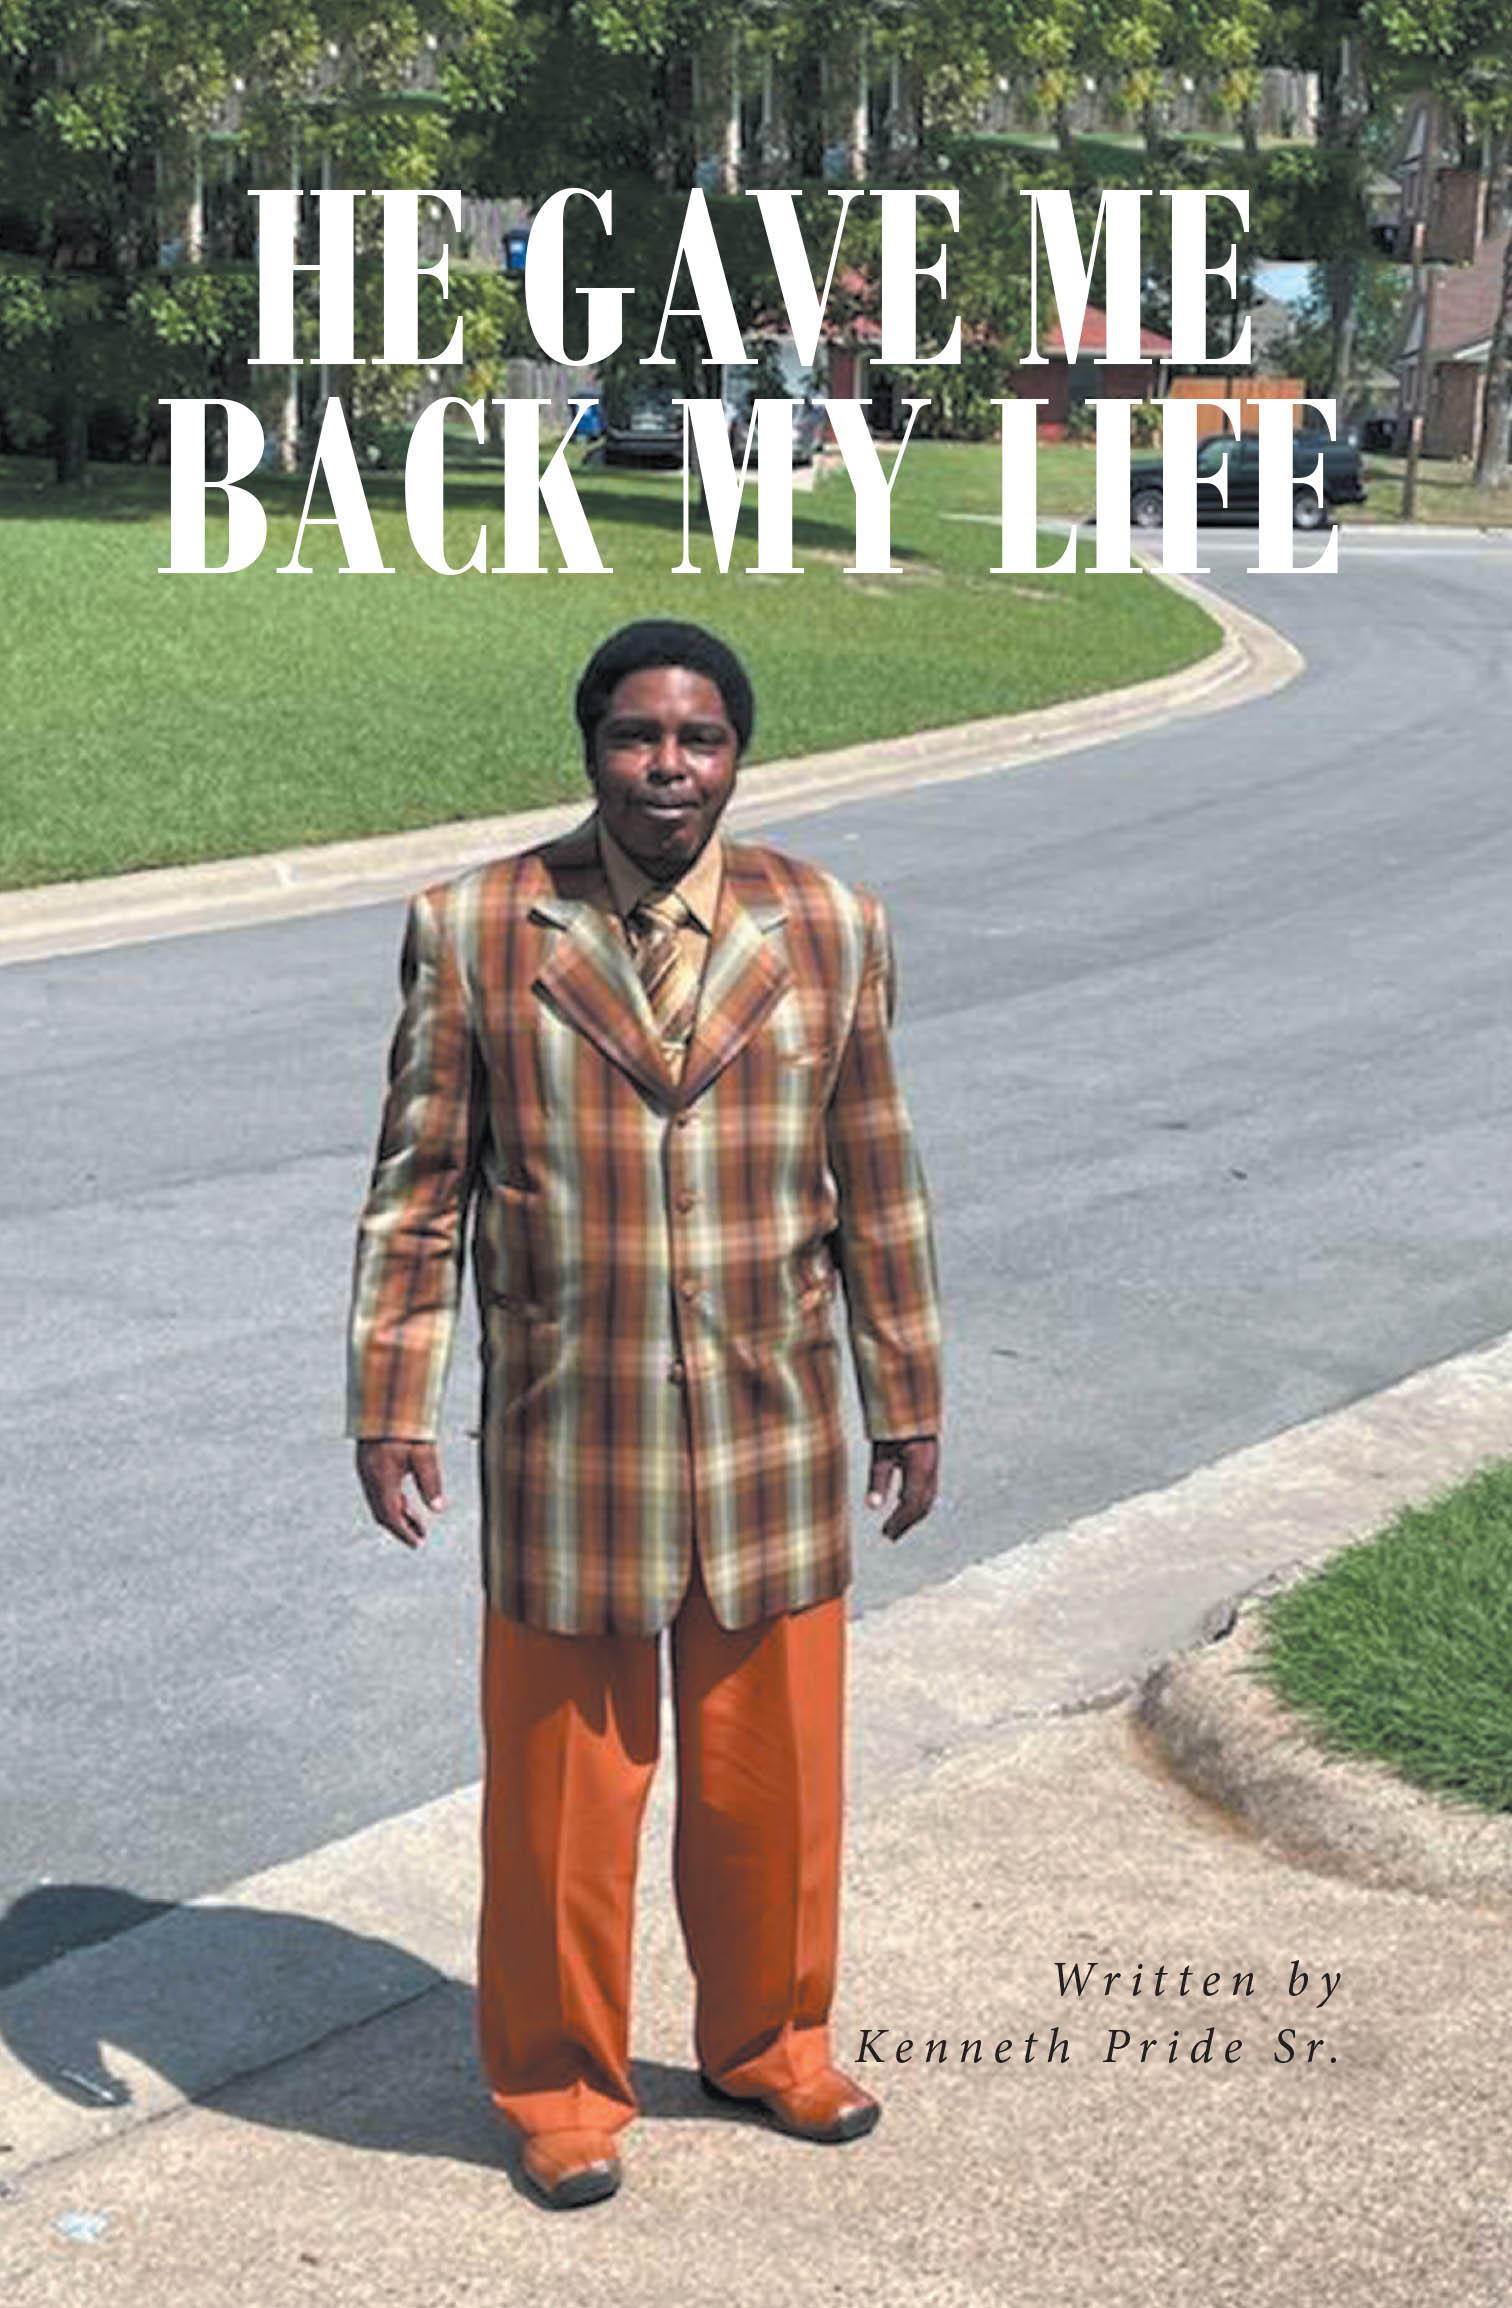 Kenneth Pride Sr.’s New Book, “He Gave Me Back My Life,” is a Series of Poems That Praise God for Saving the Author and Guiding Him Through Each of His Life's Struggles